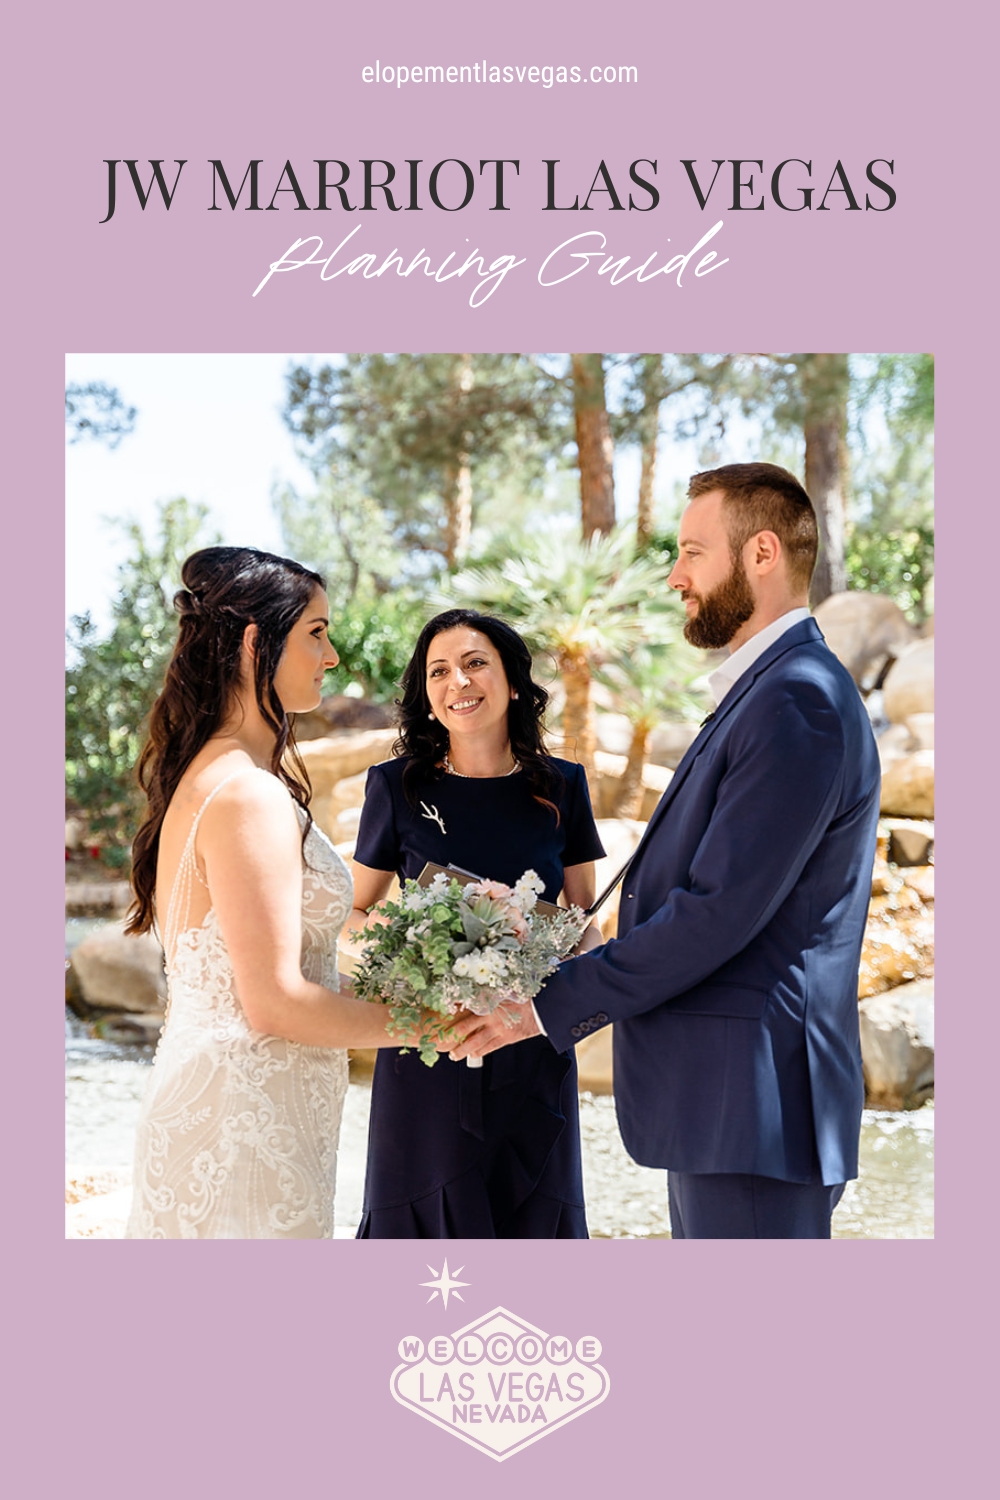 Officiant smiling at bride and groom as they hold hands; image overlaid with text that reads JW Marriott Las Vegas Planning Guide